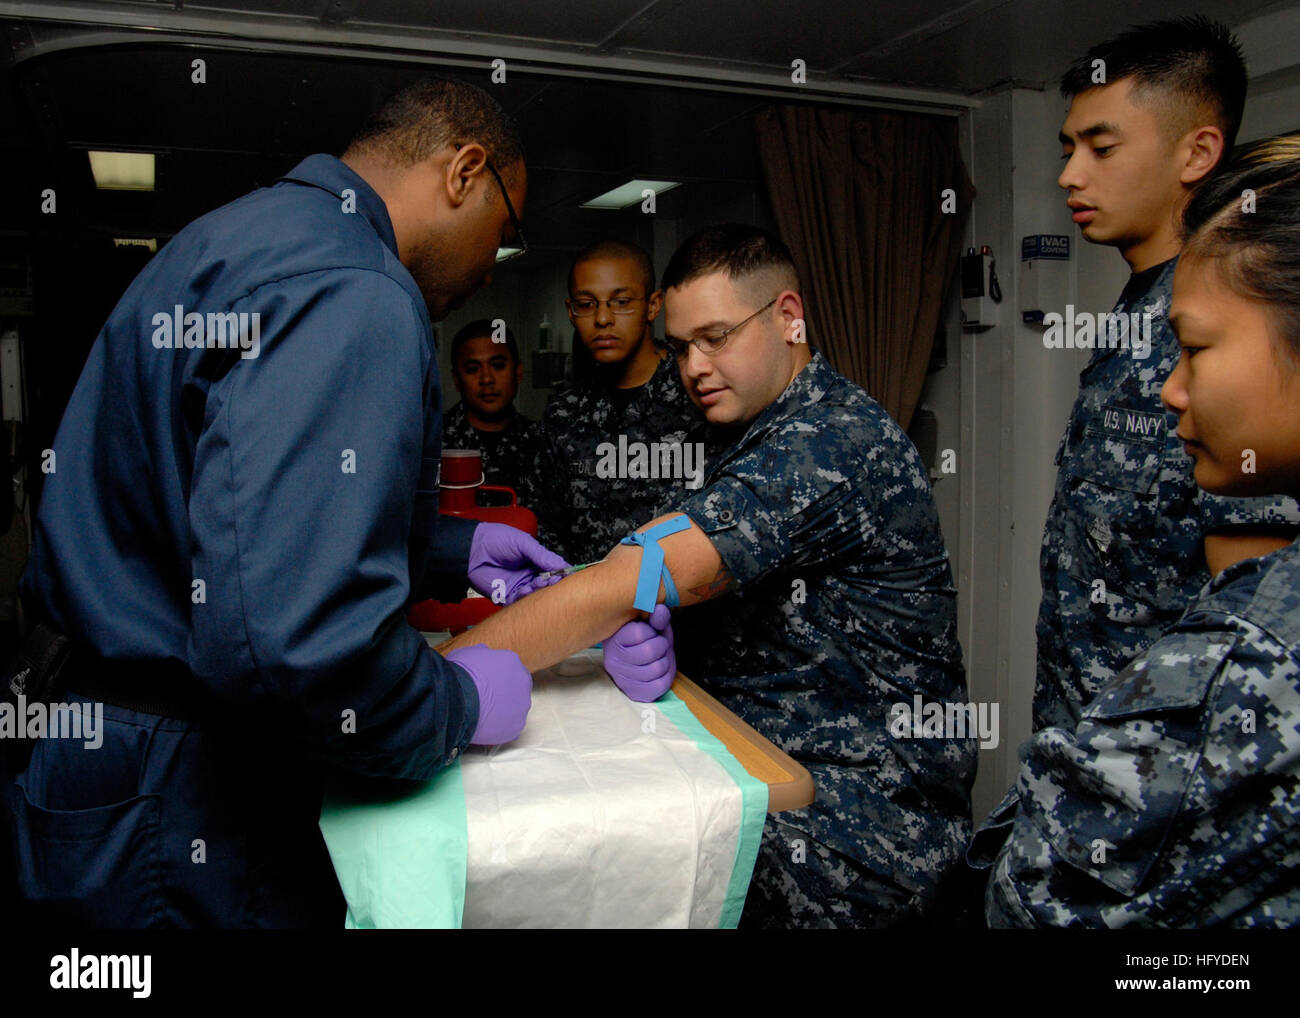 100910-N-9761H-017 SAN DIEGO (Sept. 10, 2010) Hospital Corpsman 1st Class David Toston, left, demonstrates inserting an intravenous needle into Hospital Corpsman 2nd Class Aaron Morrow's arm in the intensive care unit of the amphibious assault ship USS Boxer (LHD 4). Boxer is underway off the coast of California in preparation for an upcoming Board of Inspection and Survey (INSURV). (U.S. Navy photo by Mass Communication Specialist 2nd Class Jeff Hopkins/Released) US Navy 100910-N-9761H-017 Hospital Corpsman 1st Class David Toston, left, demonstrates inserting an intravenous needle into Hospit Stock Photo